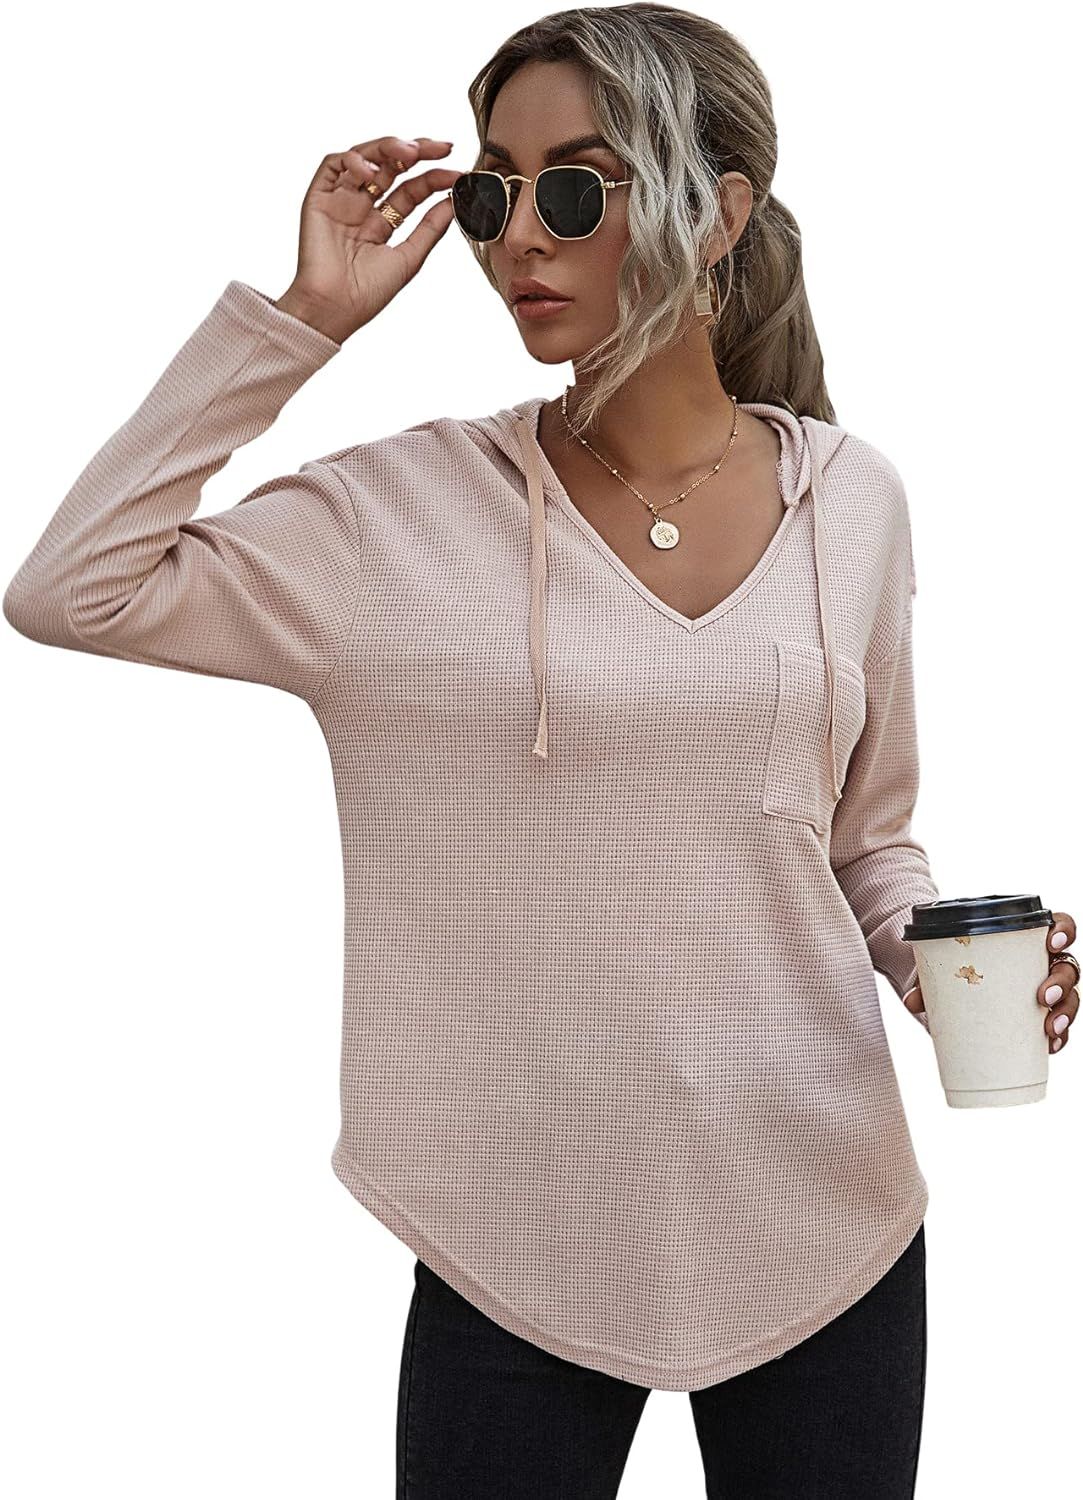 Floerns Women's Casual Long Sleeve V Neck Waffle Knit Pullover Sweatshirts Tops | Amazon (US)